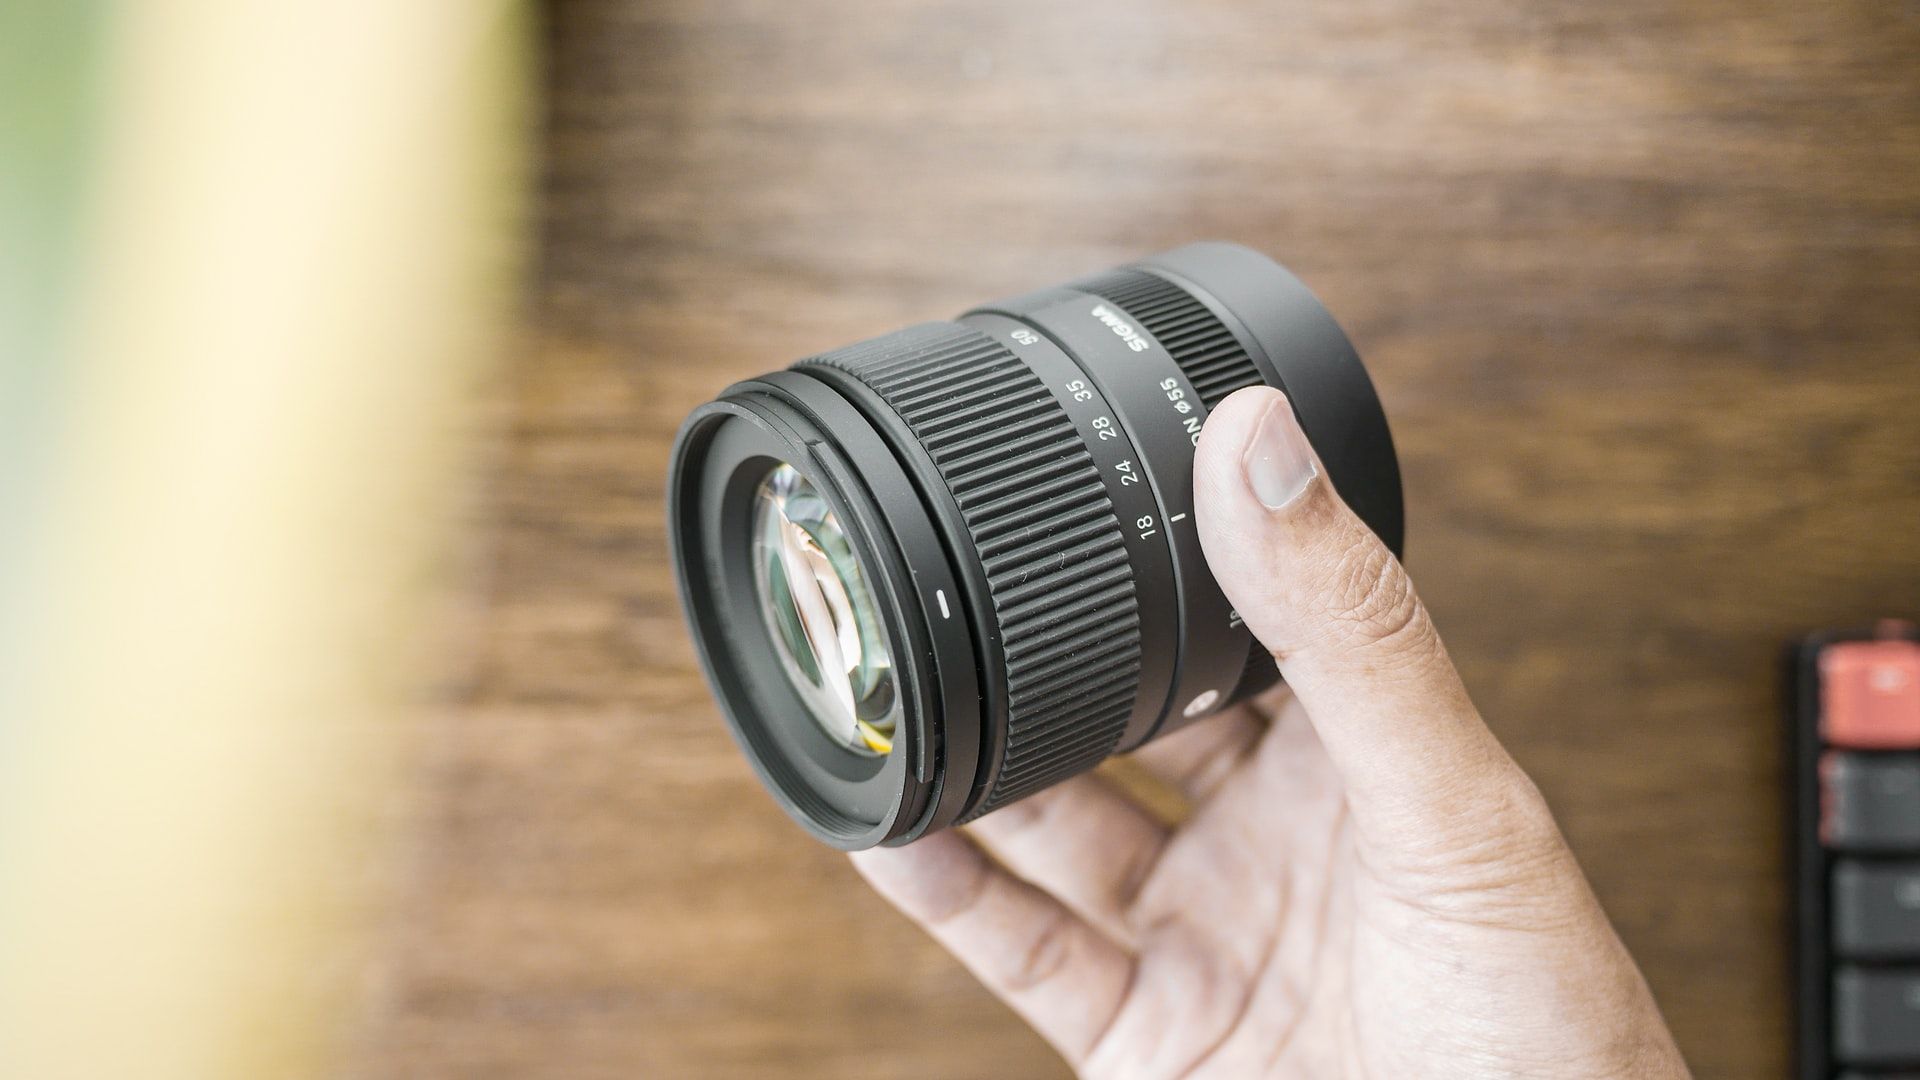 sigma 18-50mm f/2.8 lens being held